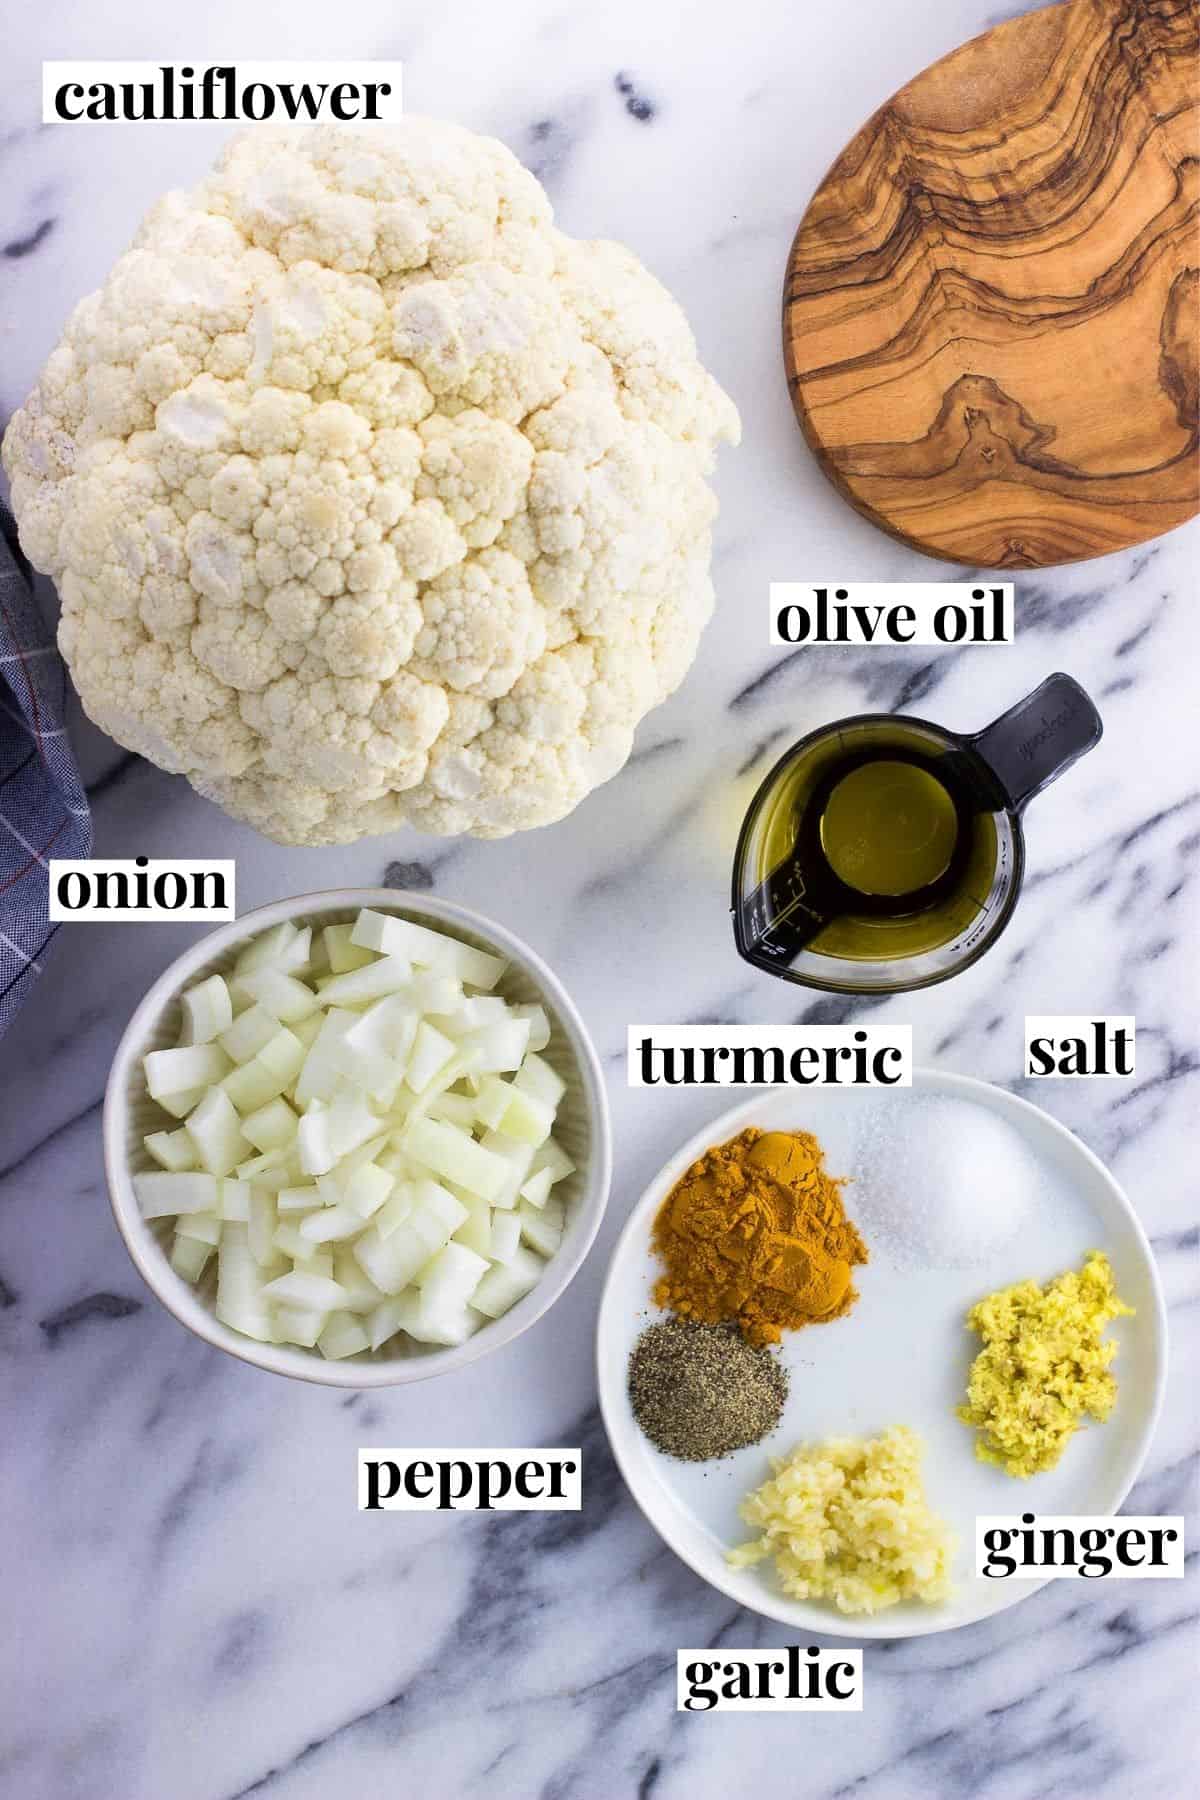 Recipe ingredients, labeled, in separate containers on a marble board.